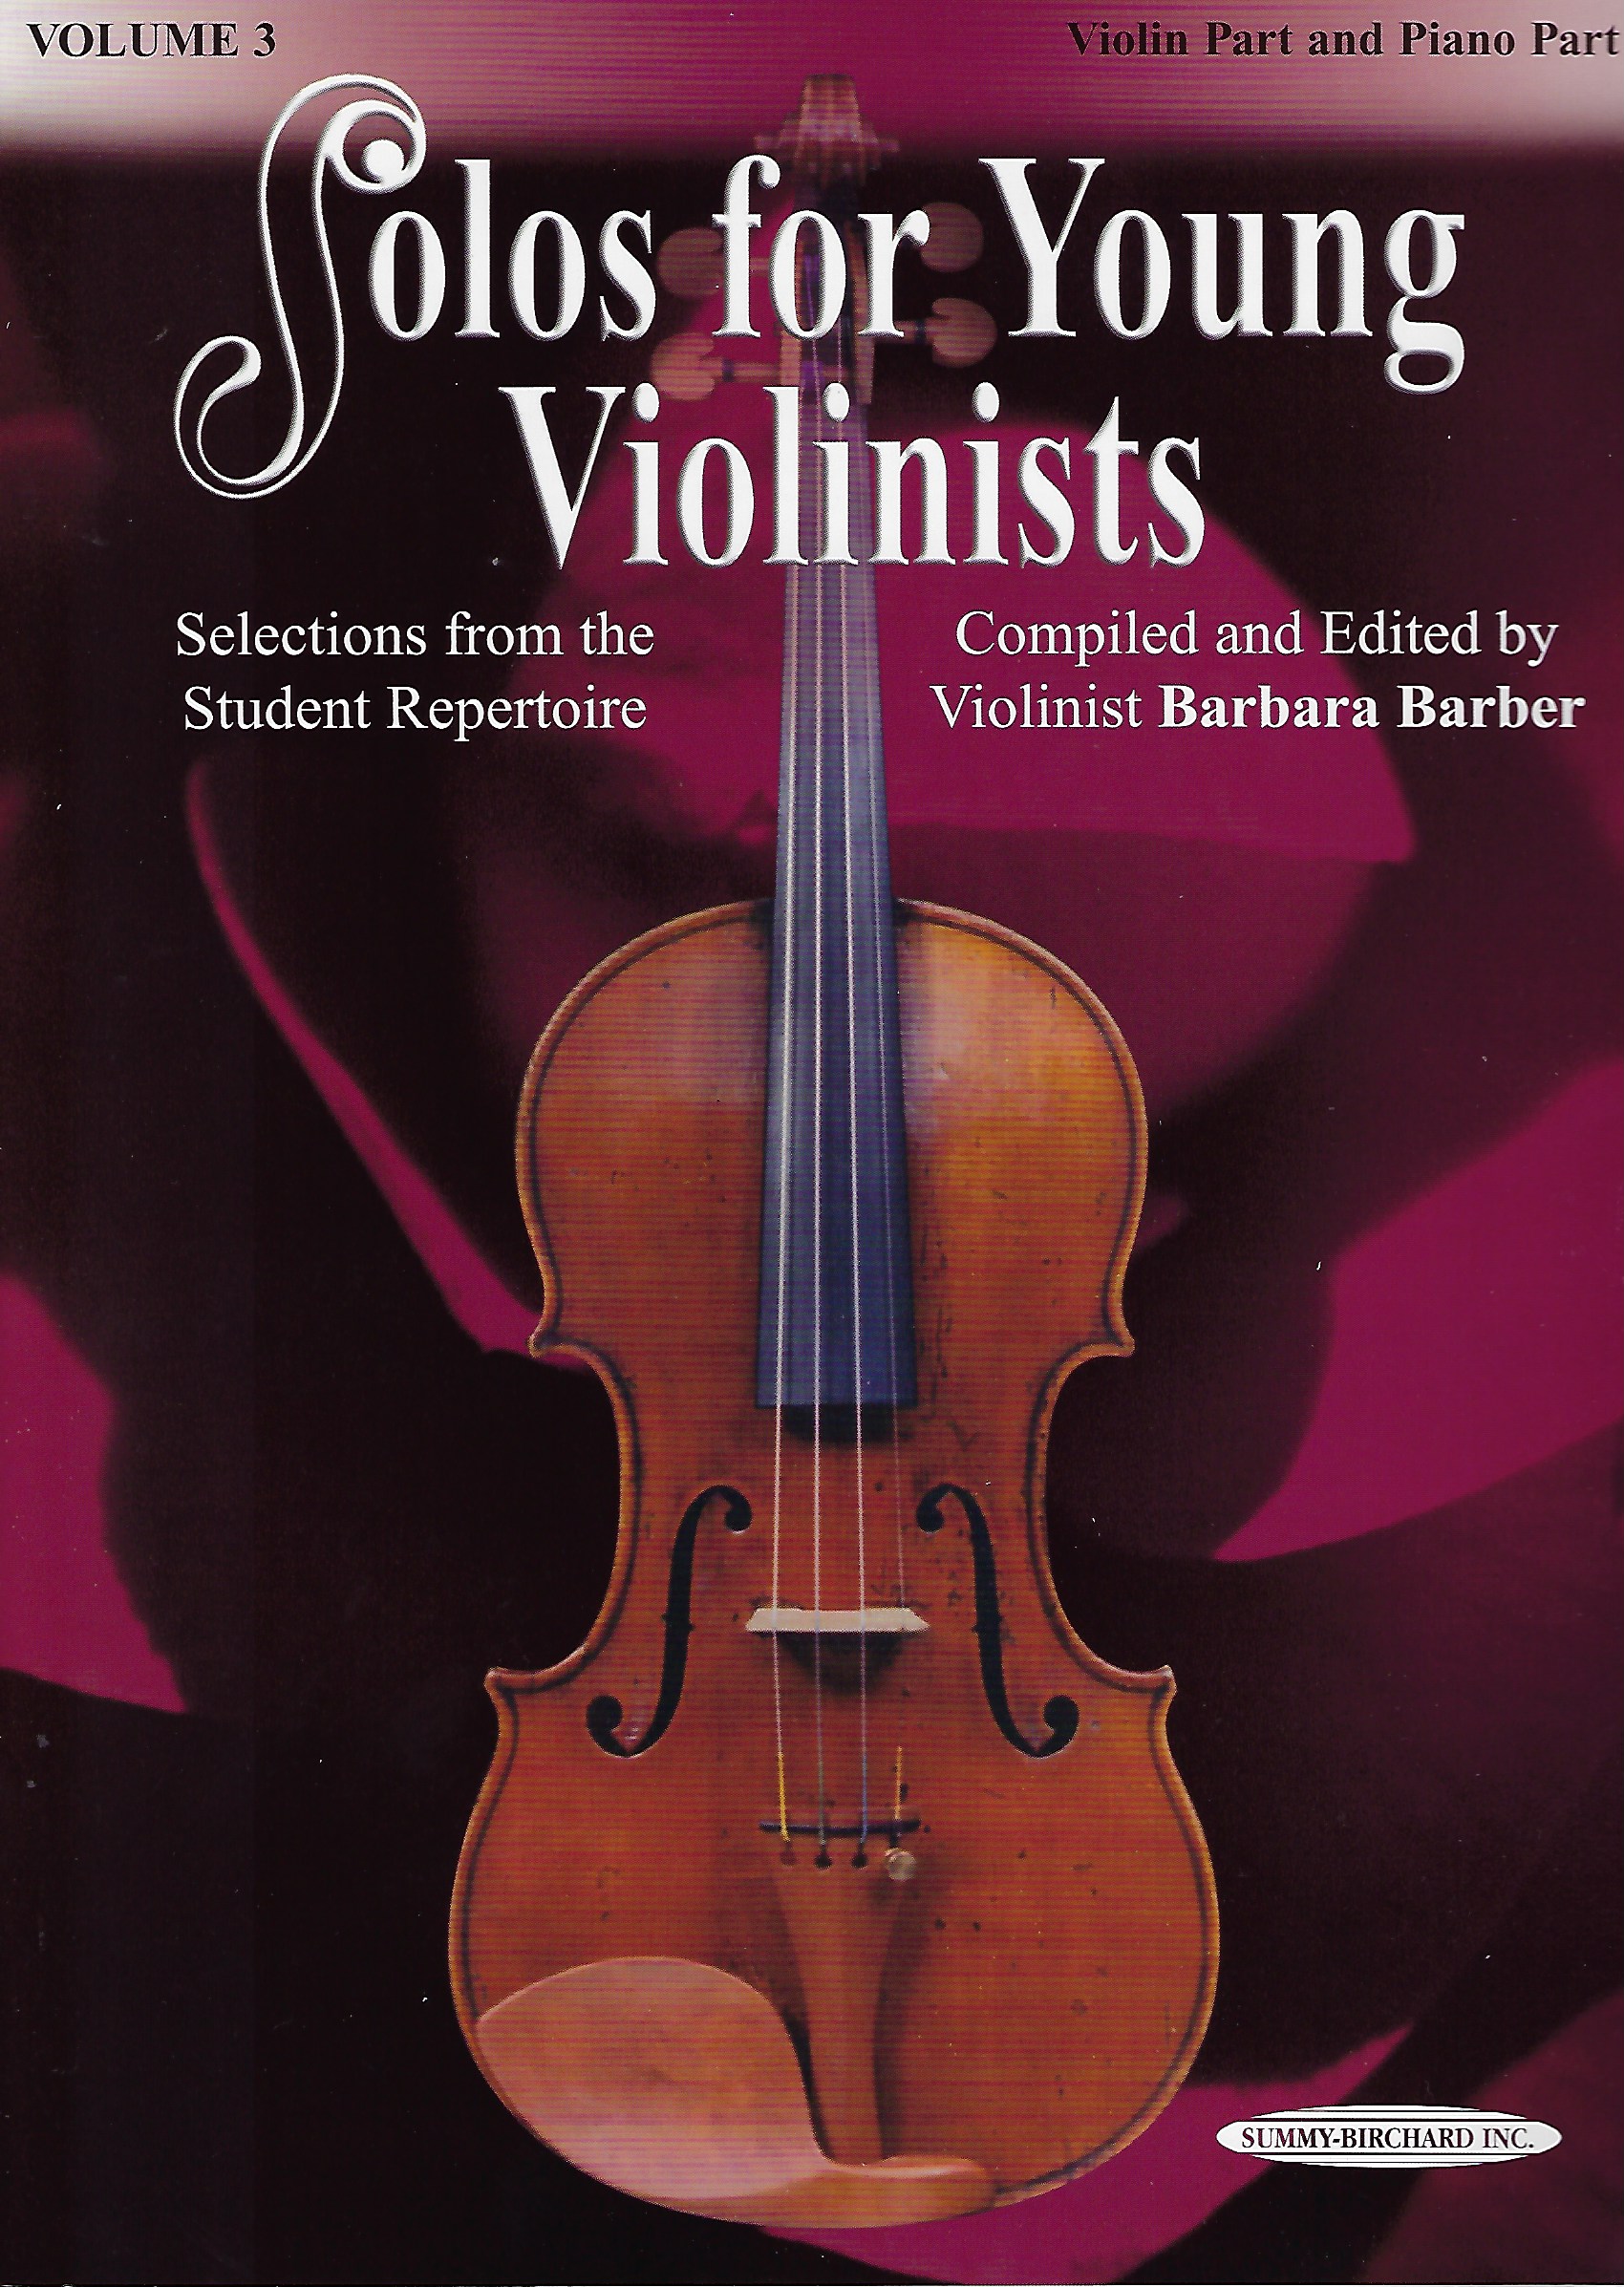 Solos for Young Violinists vol. 3